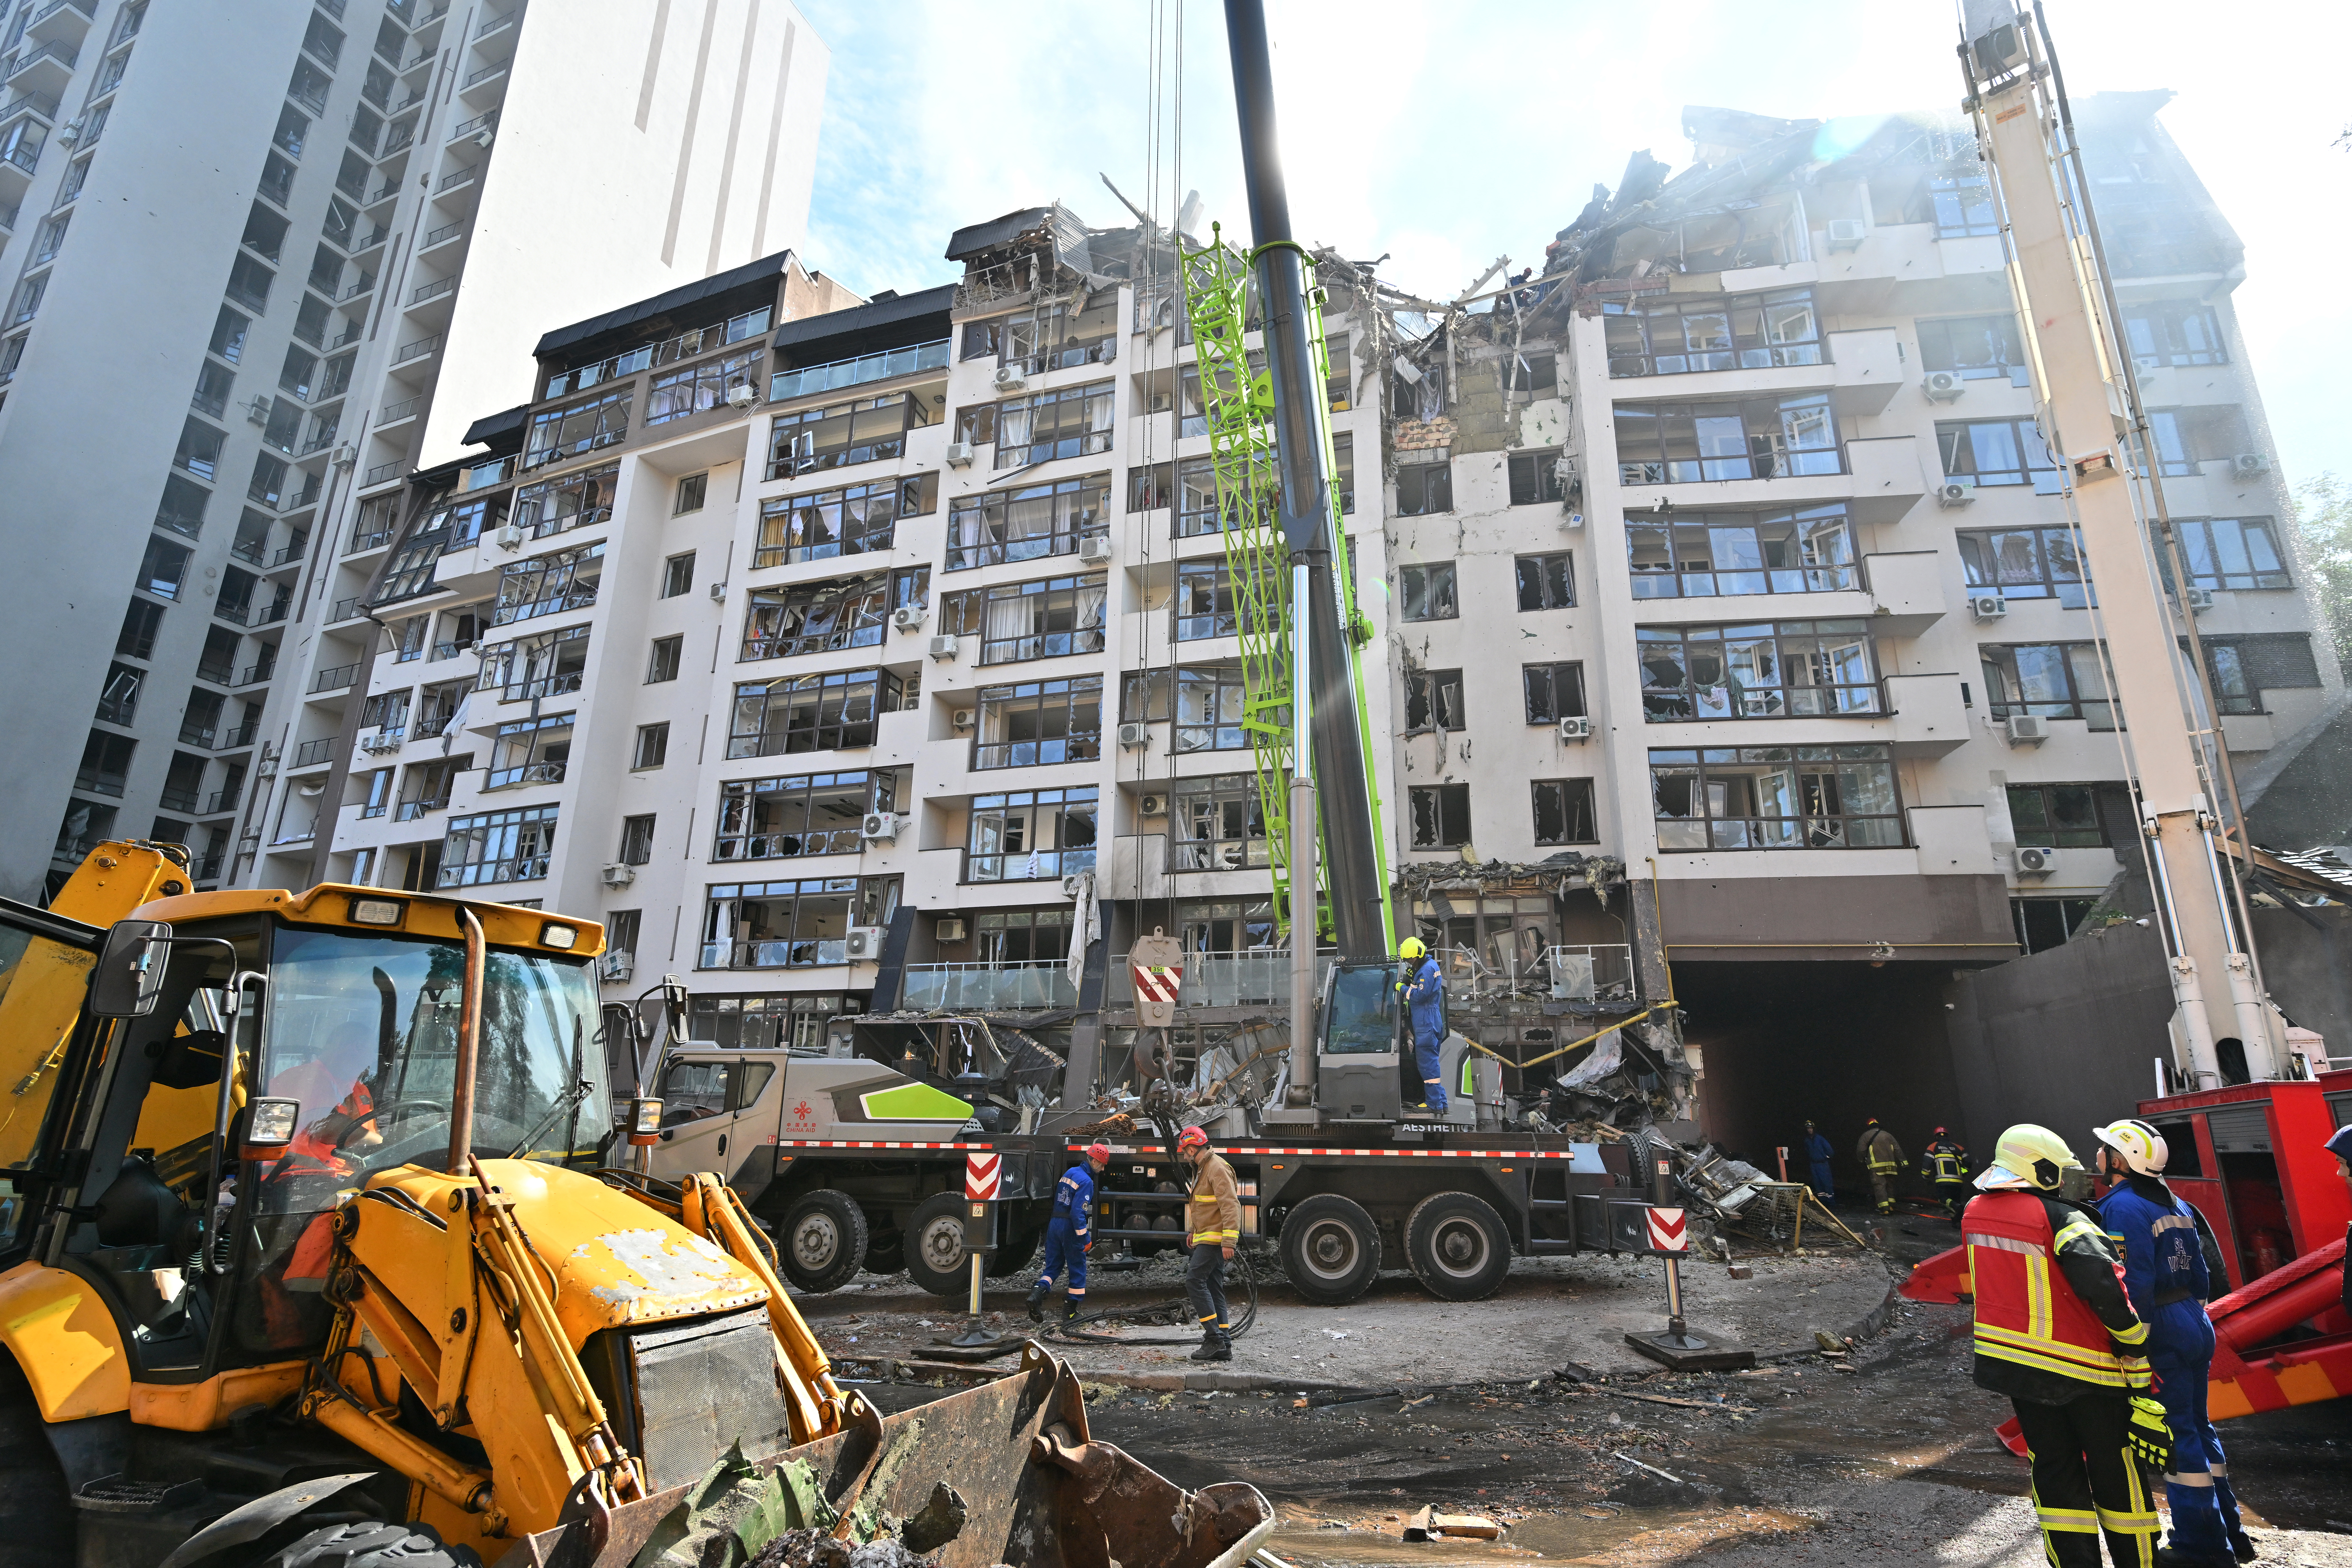 Ukrainian rescuers work outside a residential building hit by Russian missiles in Kyiv on June 26, 2022, amid Russian invasion of Ukraine. - AFP